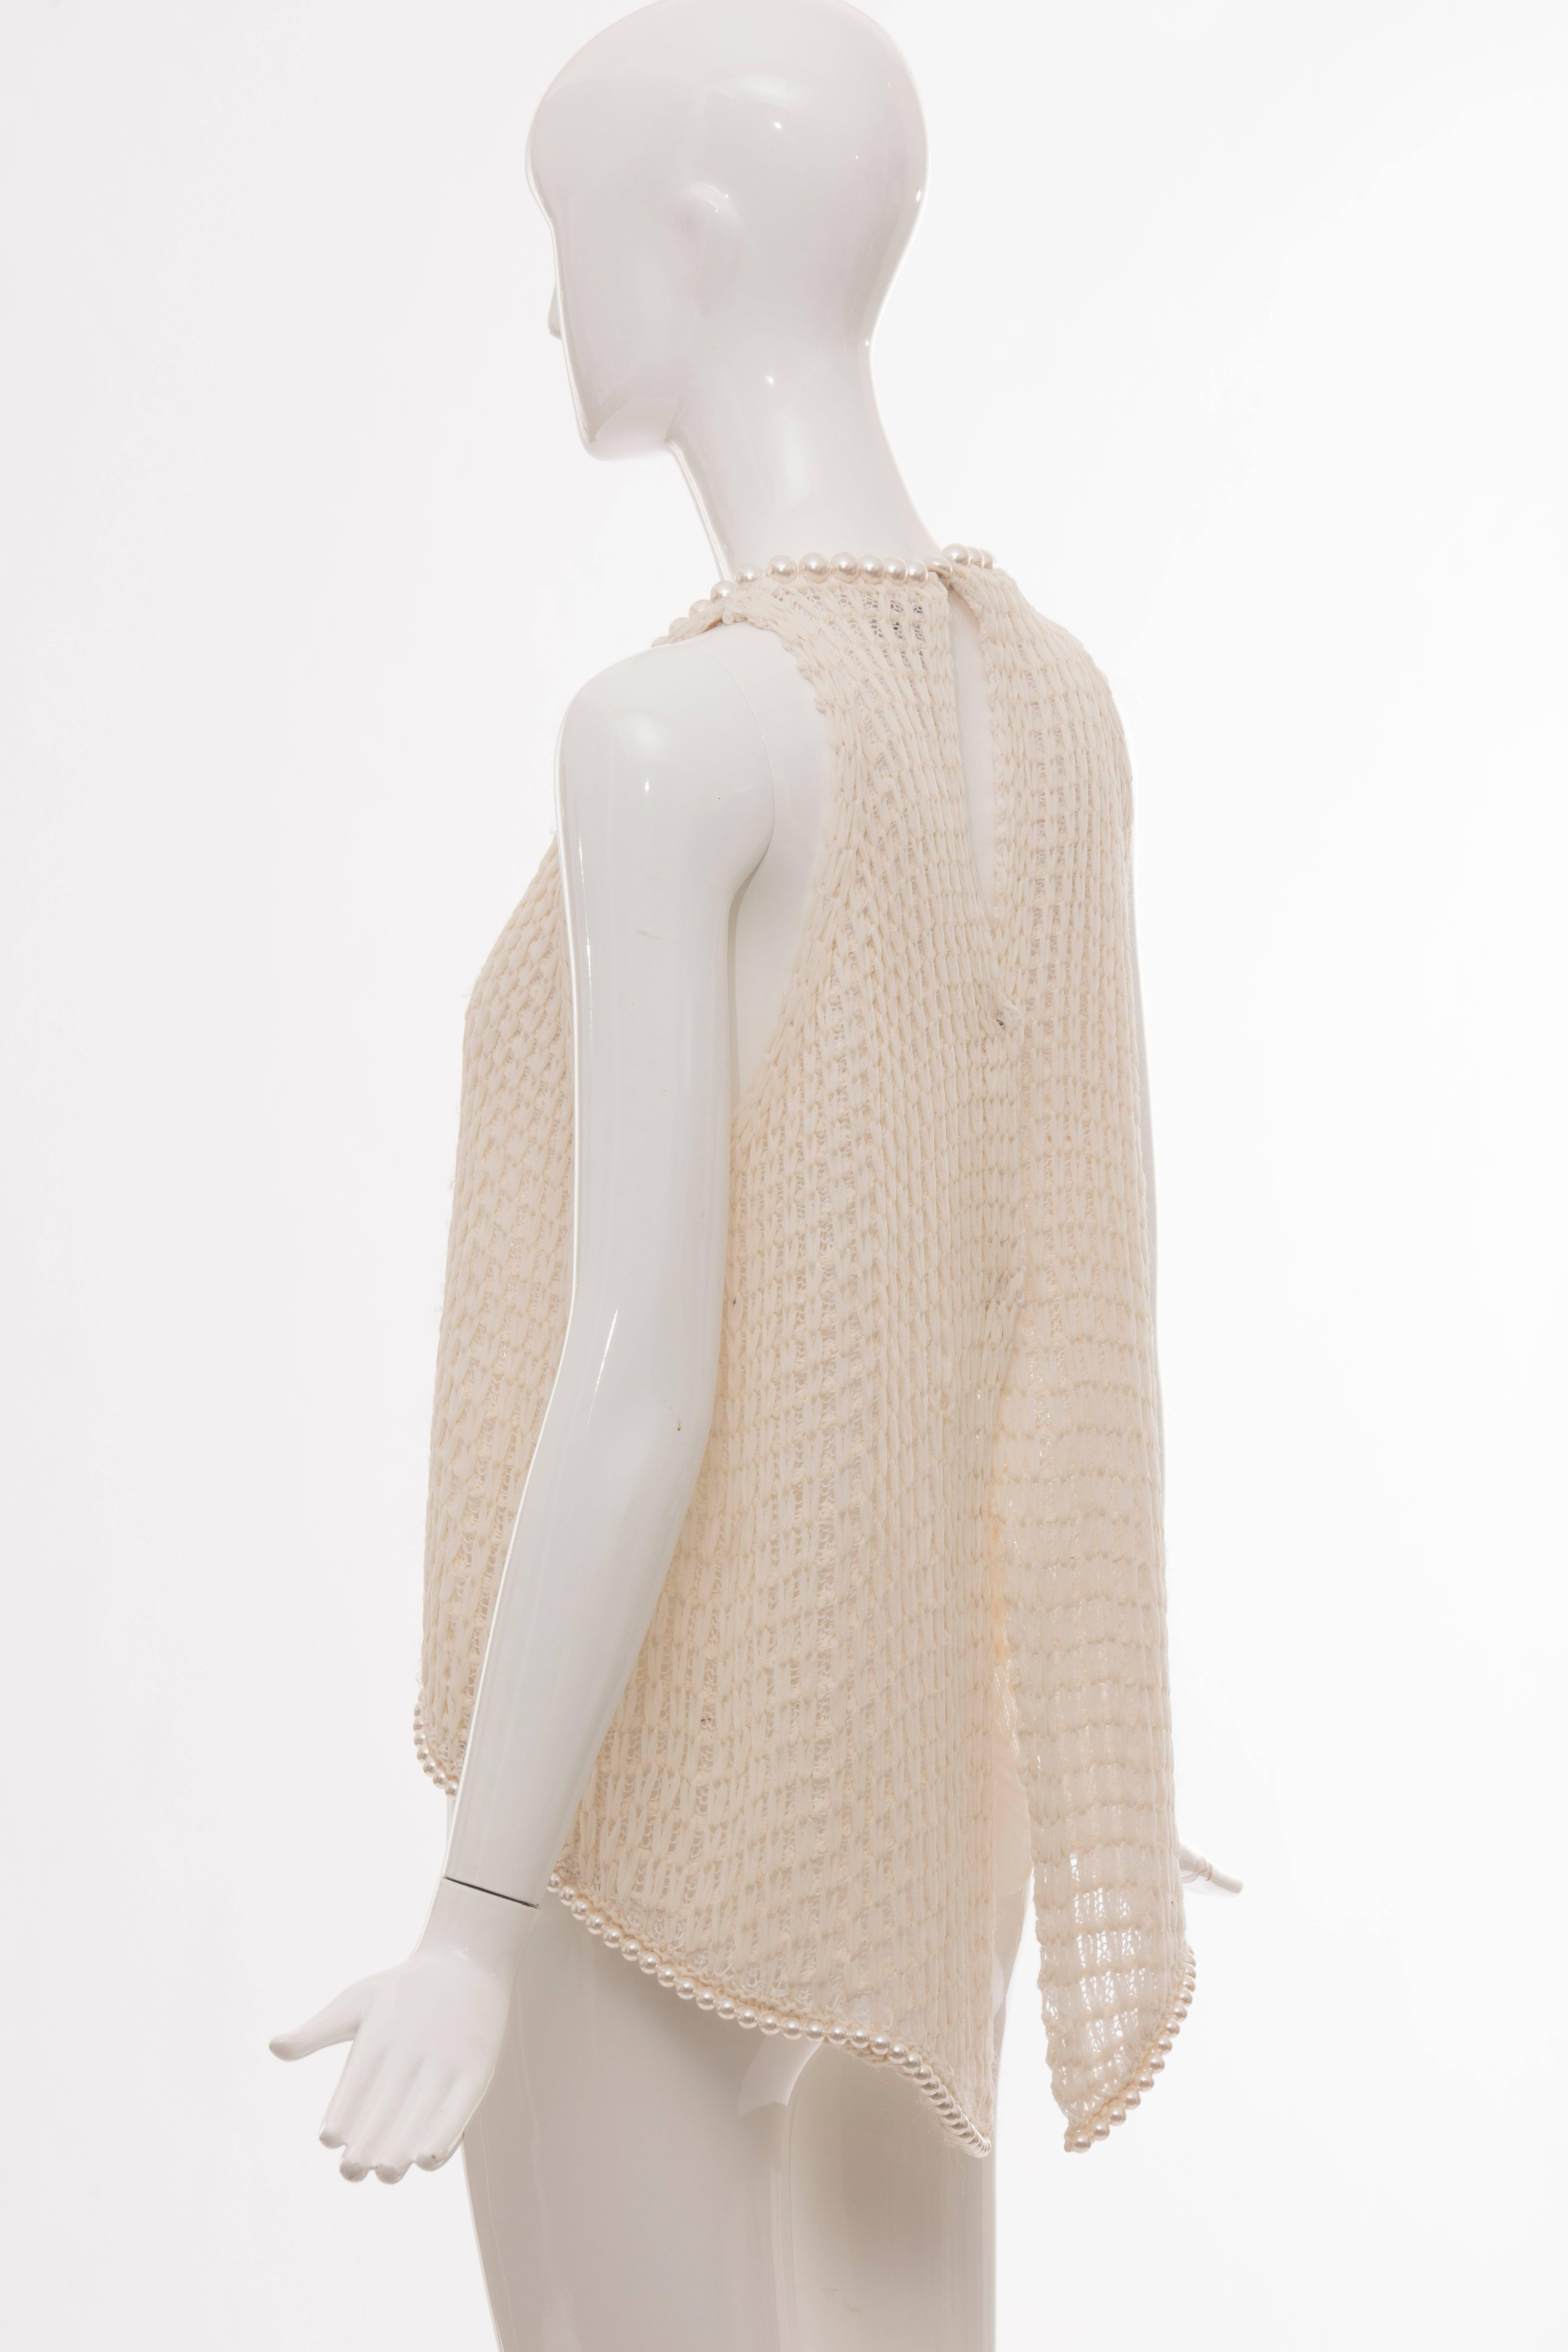 Chanel Cream Silk Blend Open Knit Top With Pearl Embellishments, Spring 2009 For Sale 2